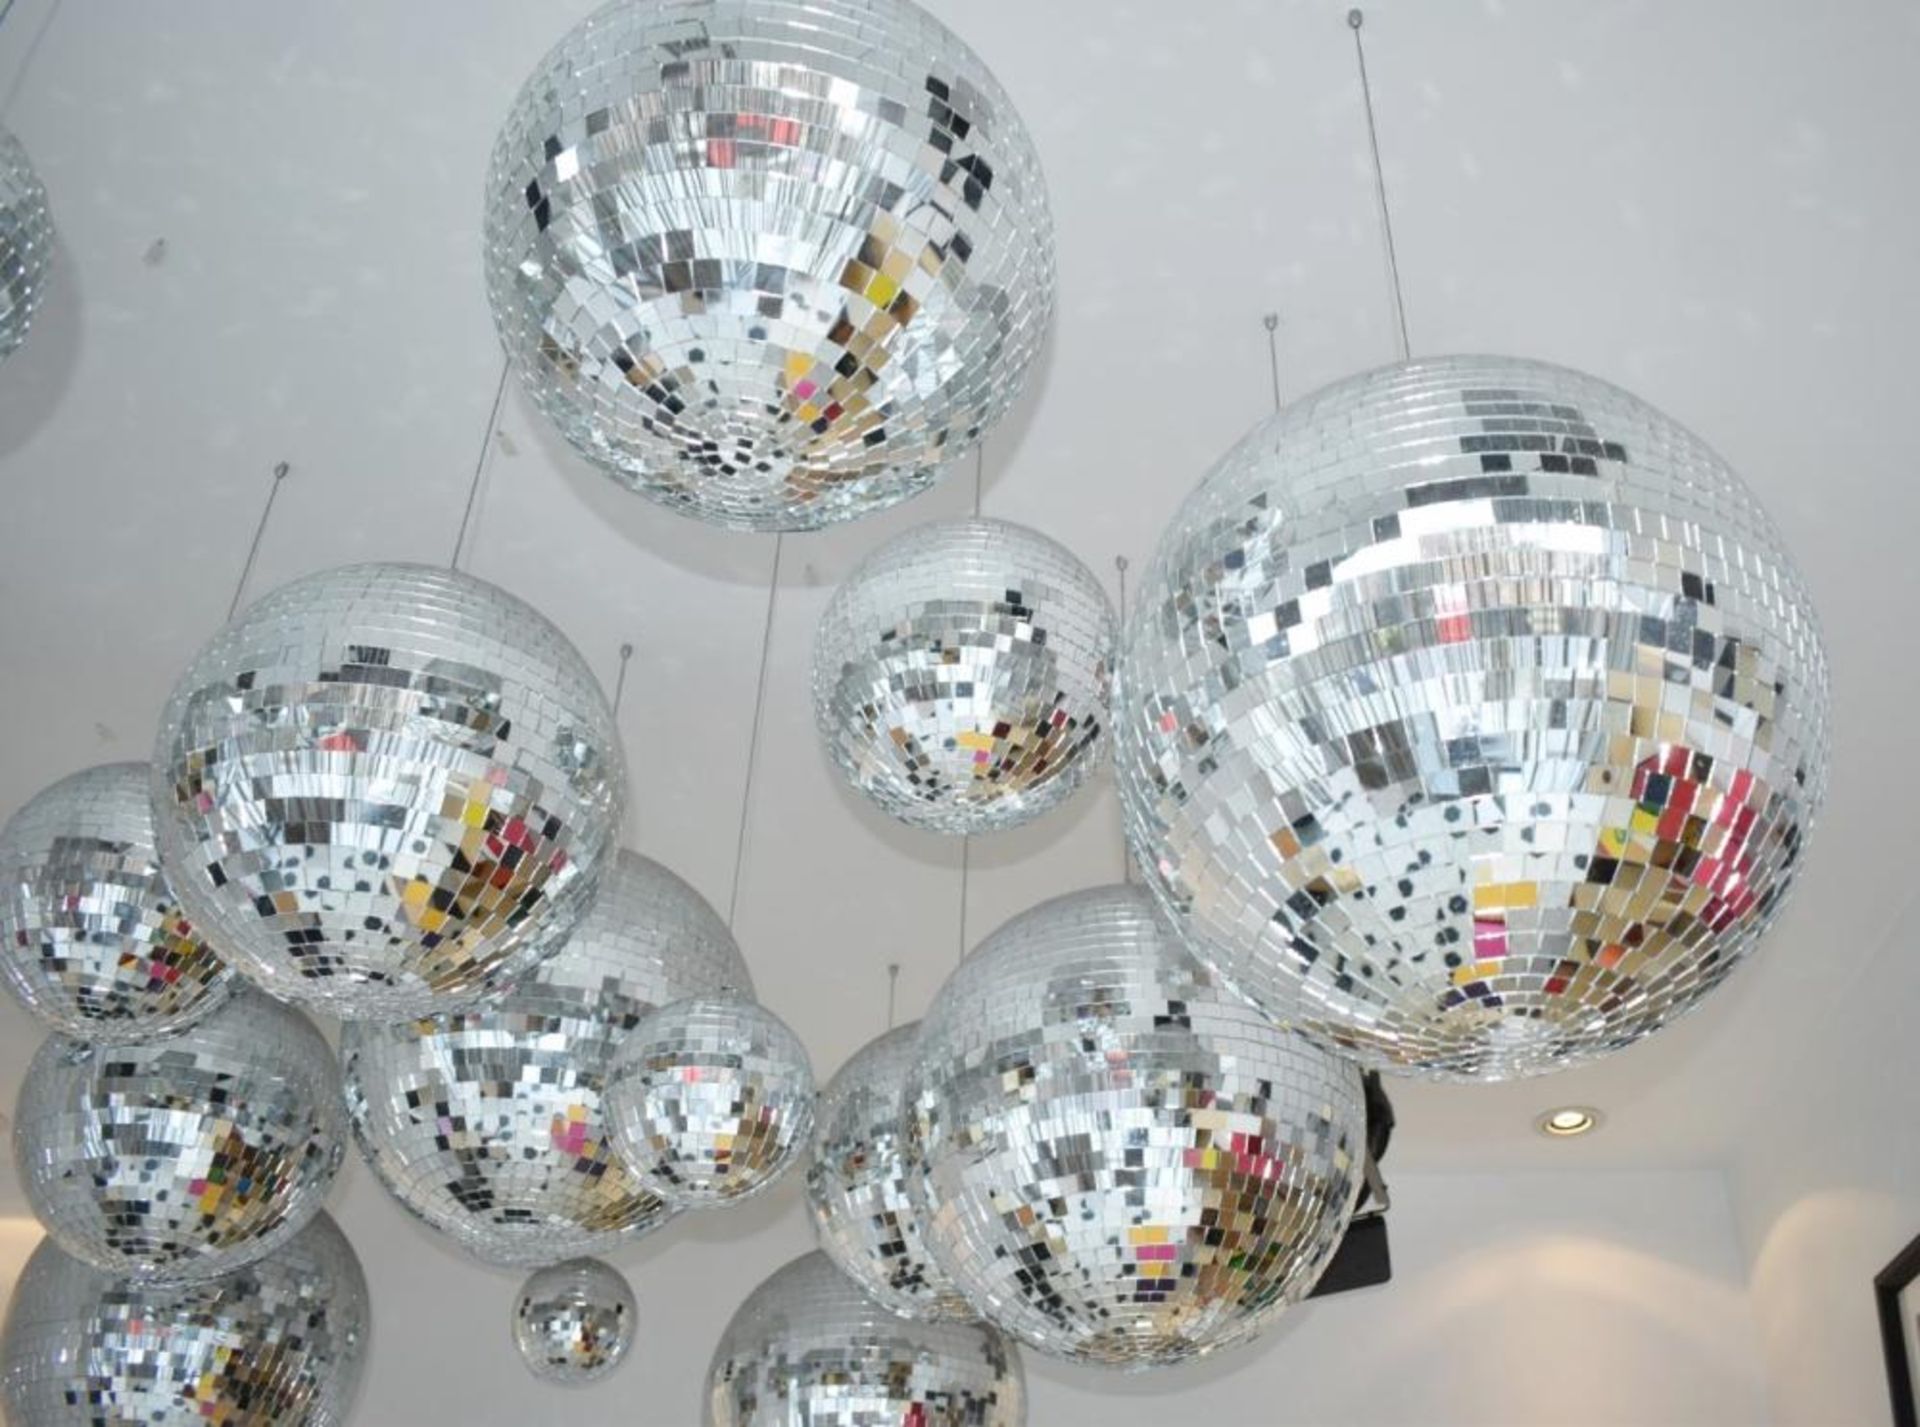 5 x Disco Mirror Glitter Balls - Ceiling Mounted - Will Include Various Sizes From Small to Large - - Image 2 of 4